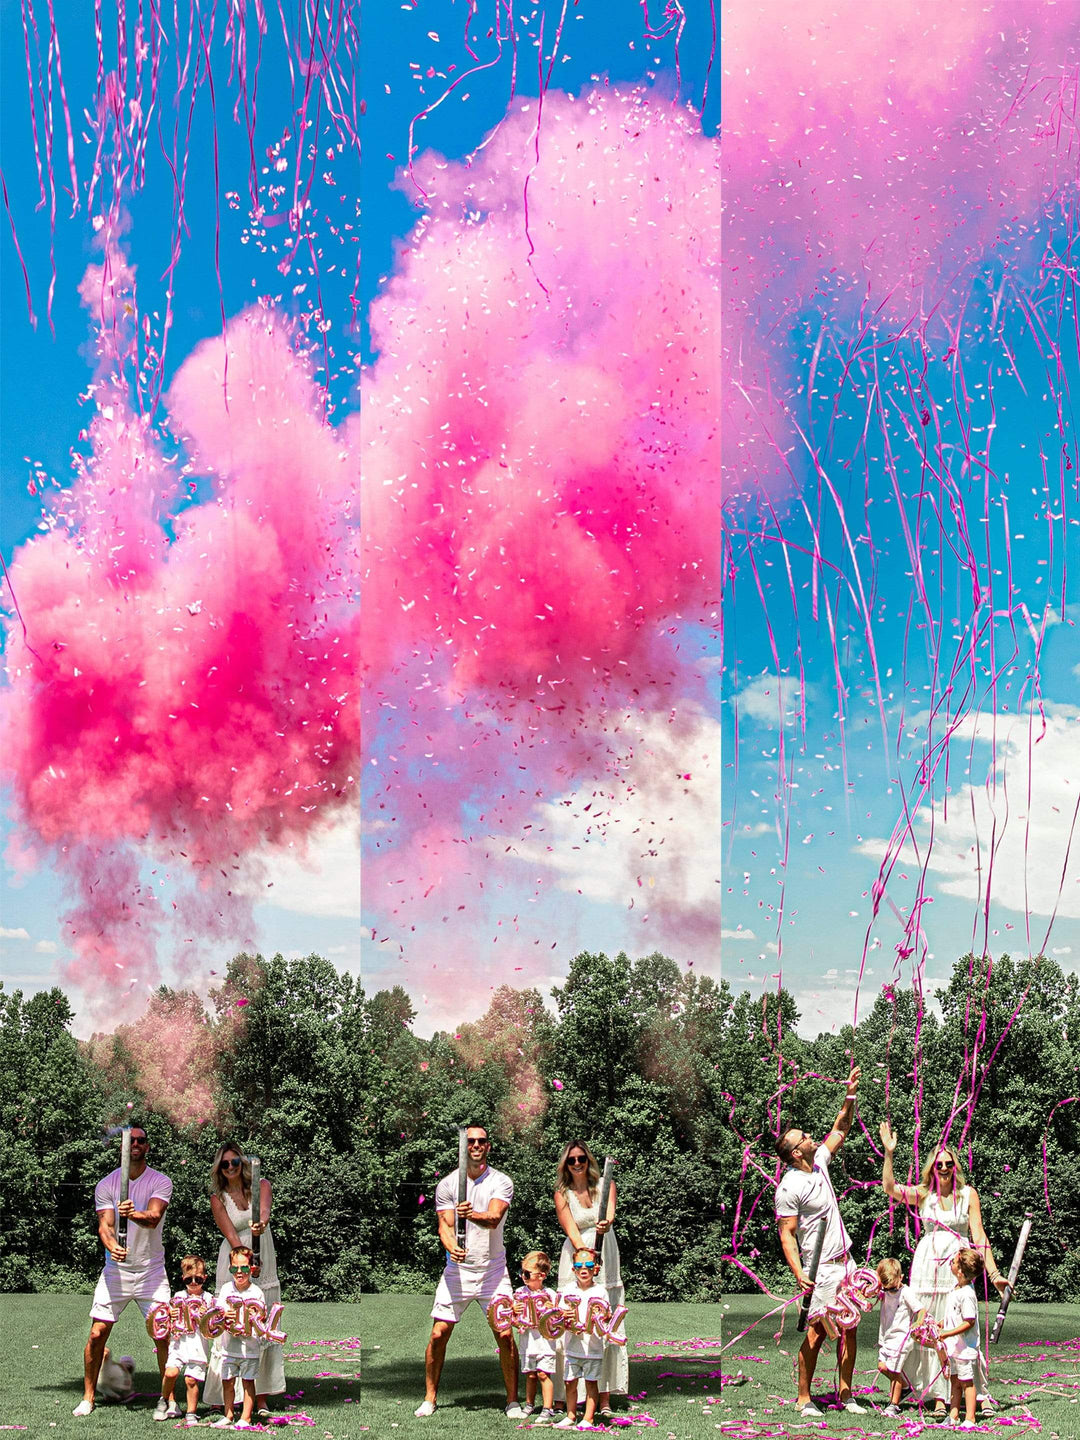 Gender Reveal Confetti & Powder Smoke Cannons - 2 Pink and 2 Blue